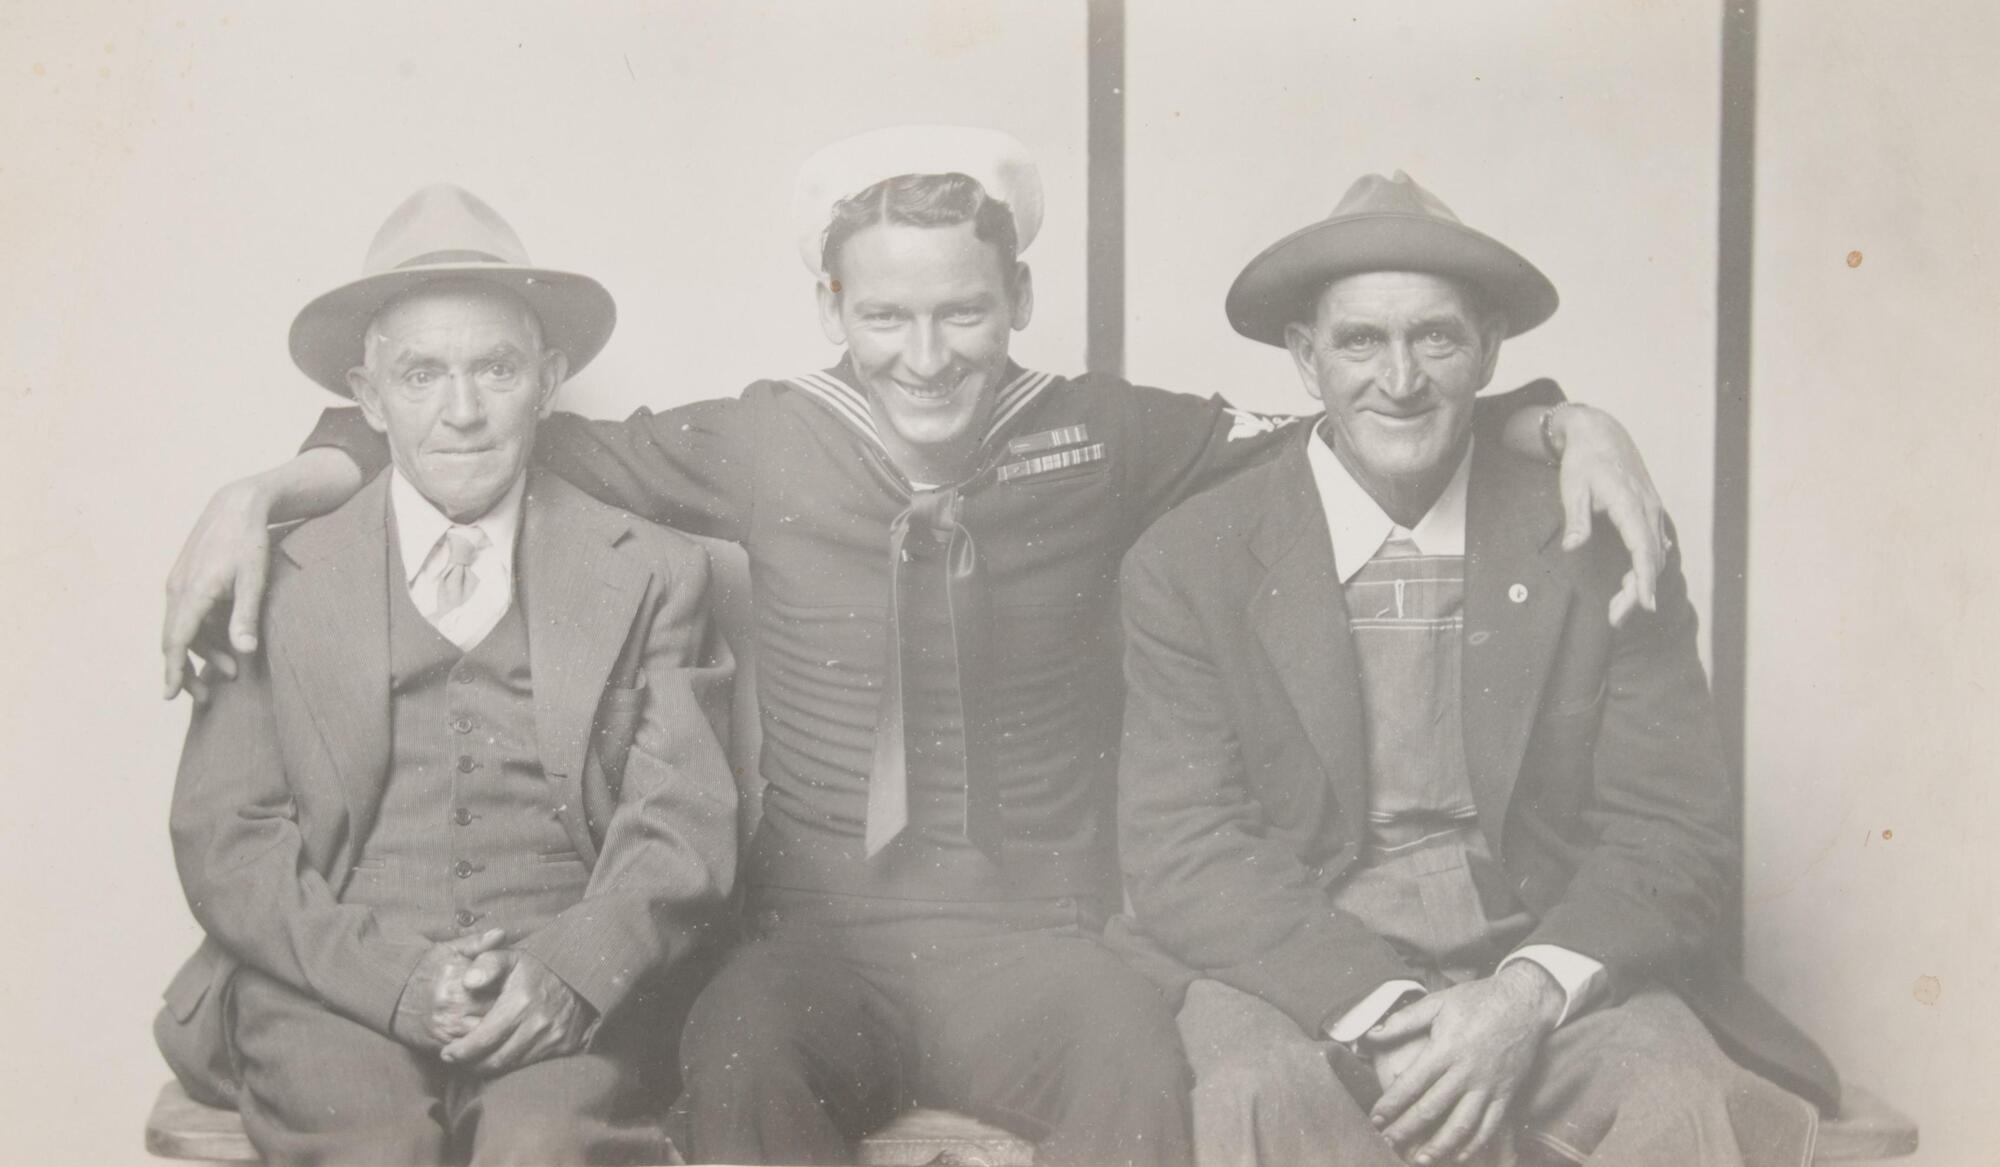 A portrait of three seated men. On the left, an older man sits with his hands clasped in his lap. In the center, a man in naval uniform sits with his arms around both men. On the right, a third man sits with his hands in his lap. All three wear hats and smile.